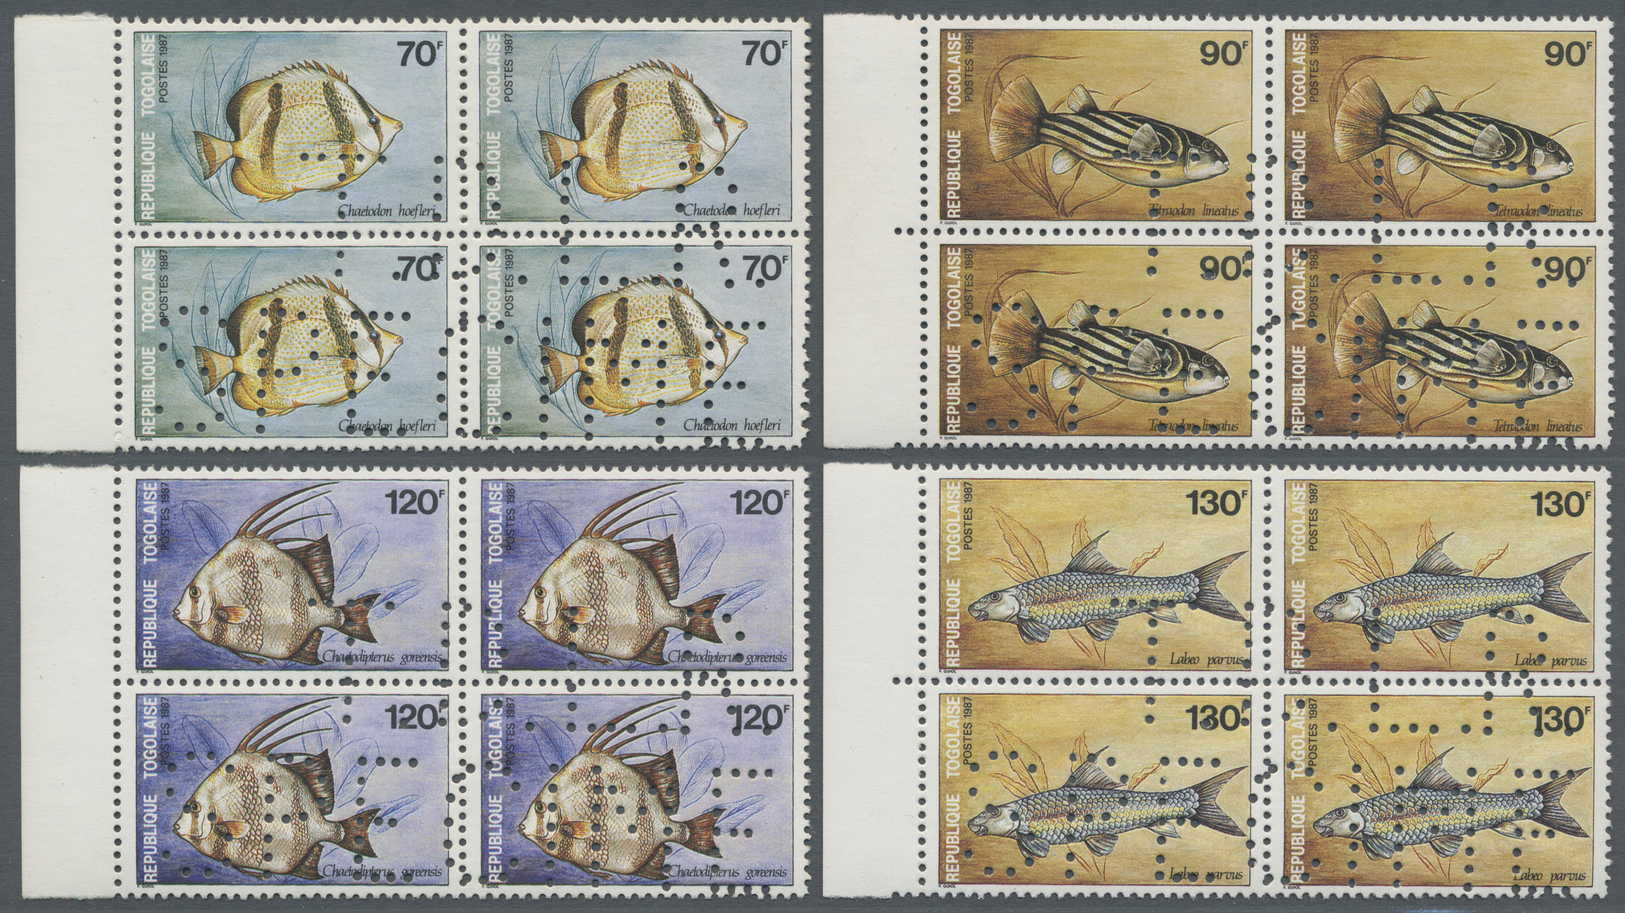 **/Br Thematik: Tiere-Fische / Animals-fishes: 1987, Togo, Fishes Serie, Complete Set As Marginal Blocks Of Four With Sp - Fishes